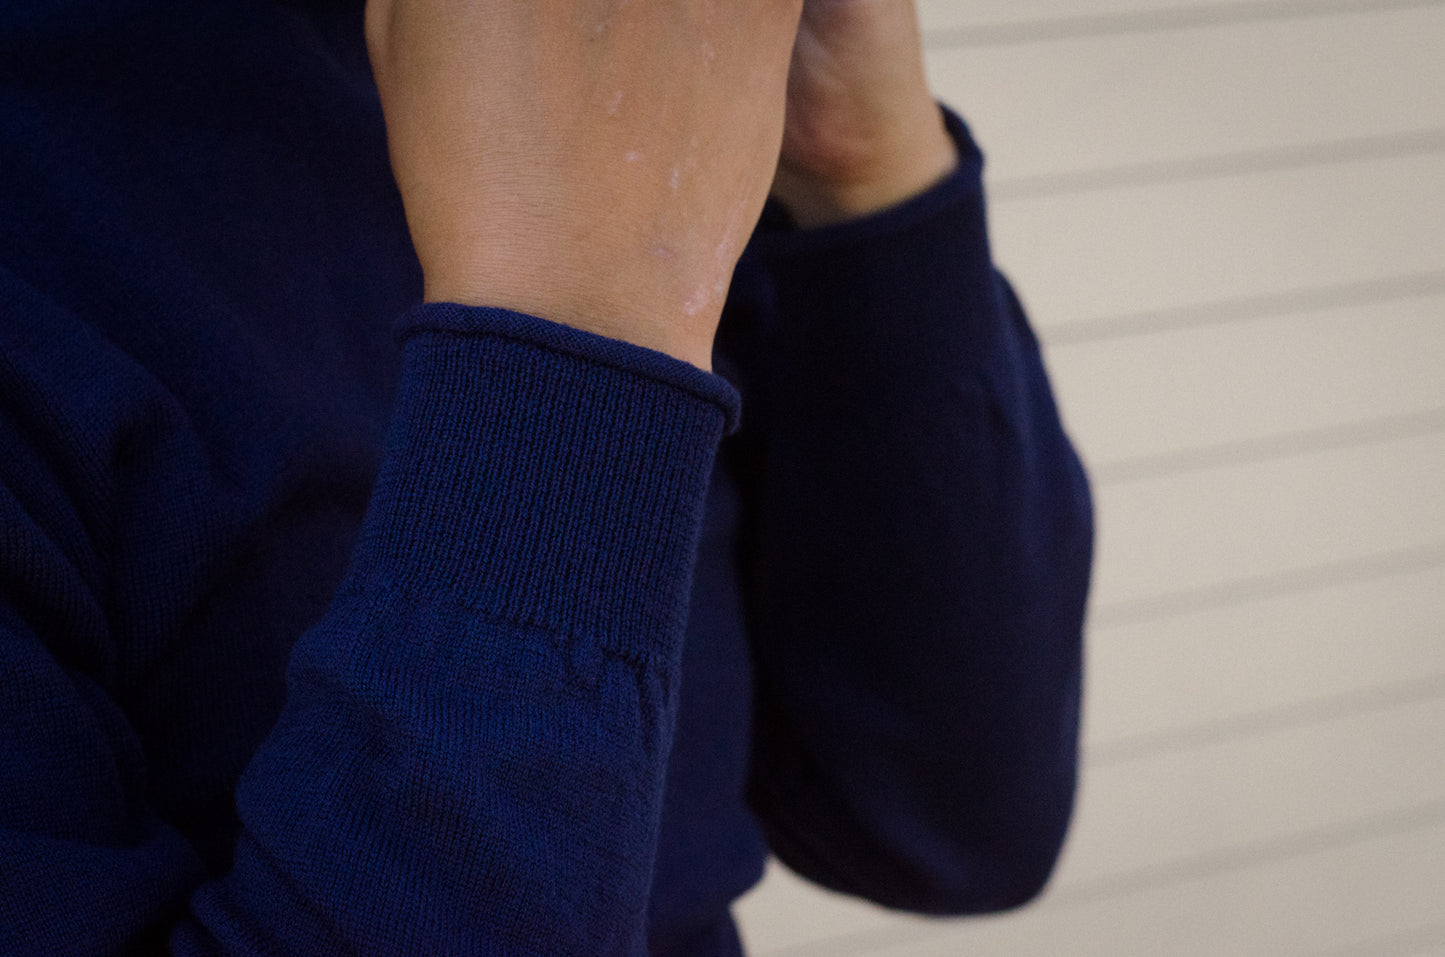 WoolyWarm all merino navy blue sweater from England